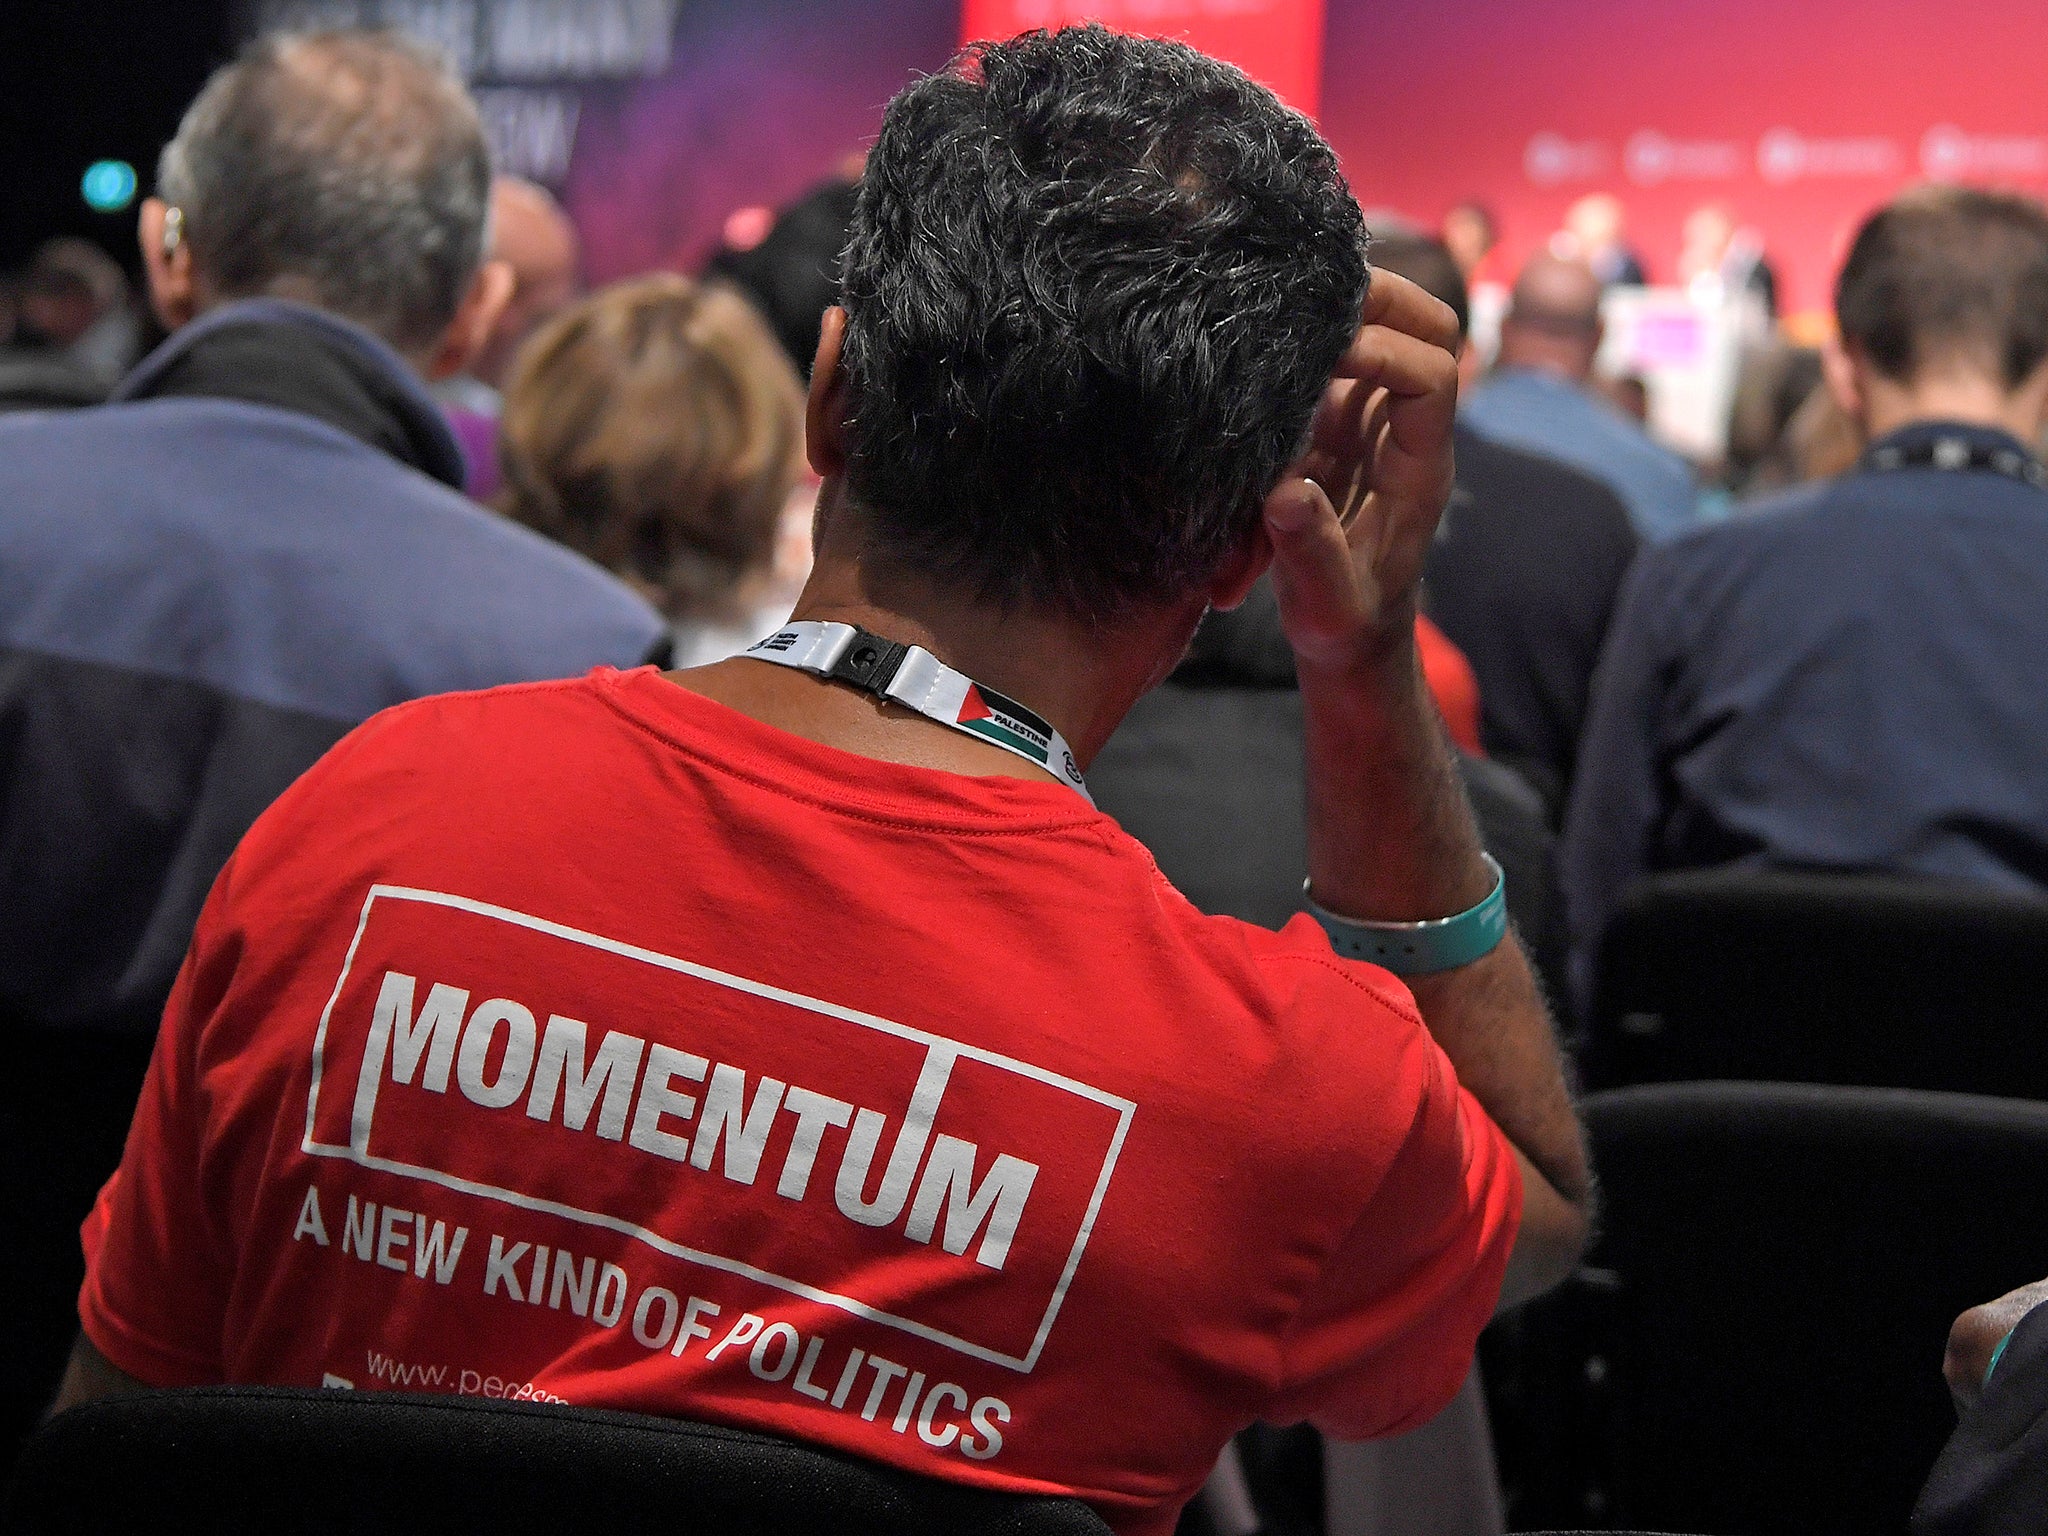 A member of the audience wearing a Momentum T-shirt listens to speeches at a Labour Party Conference